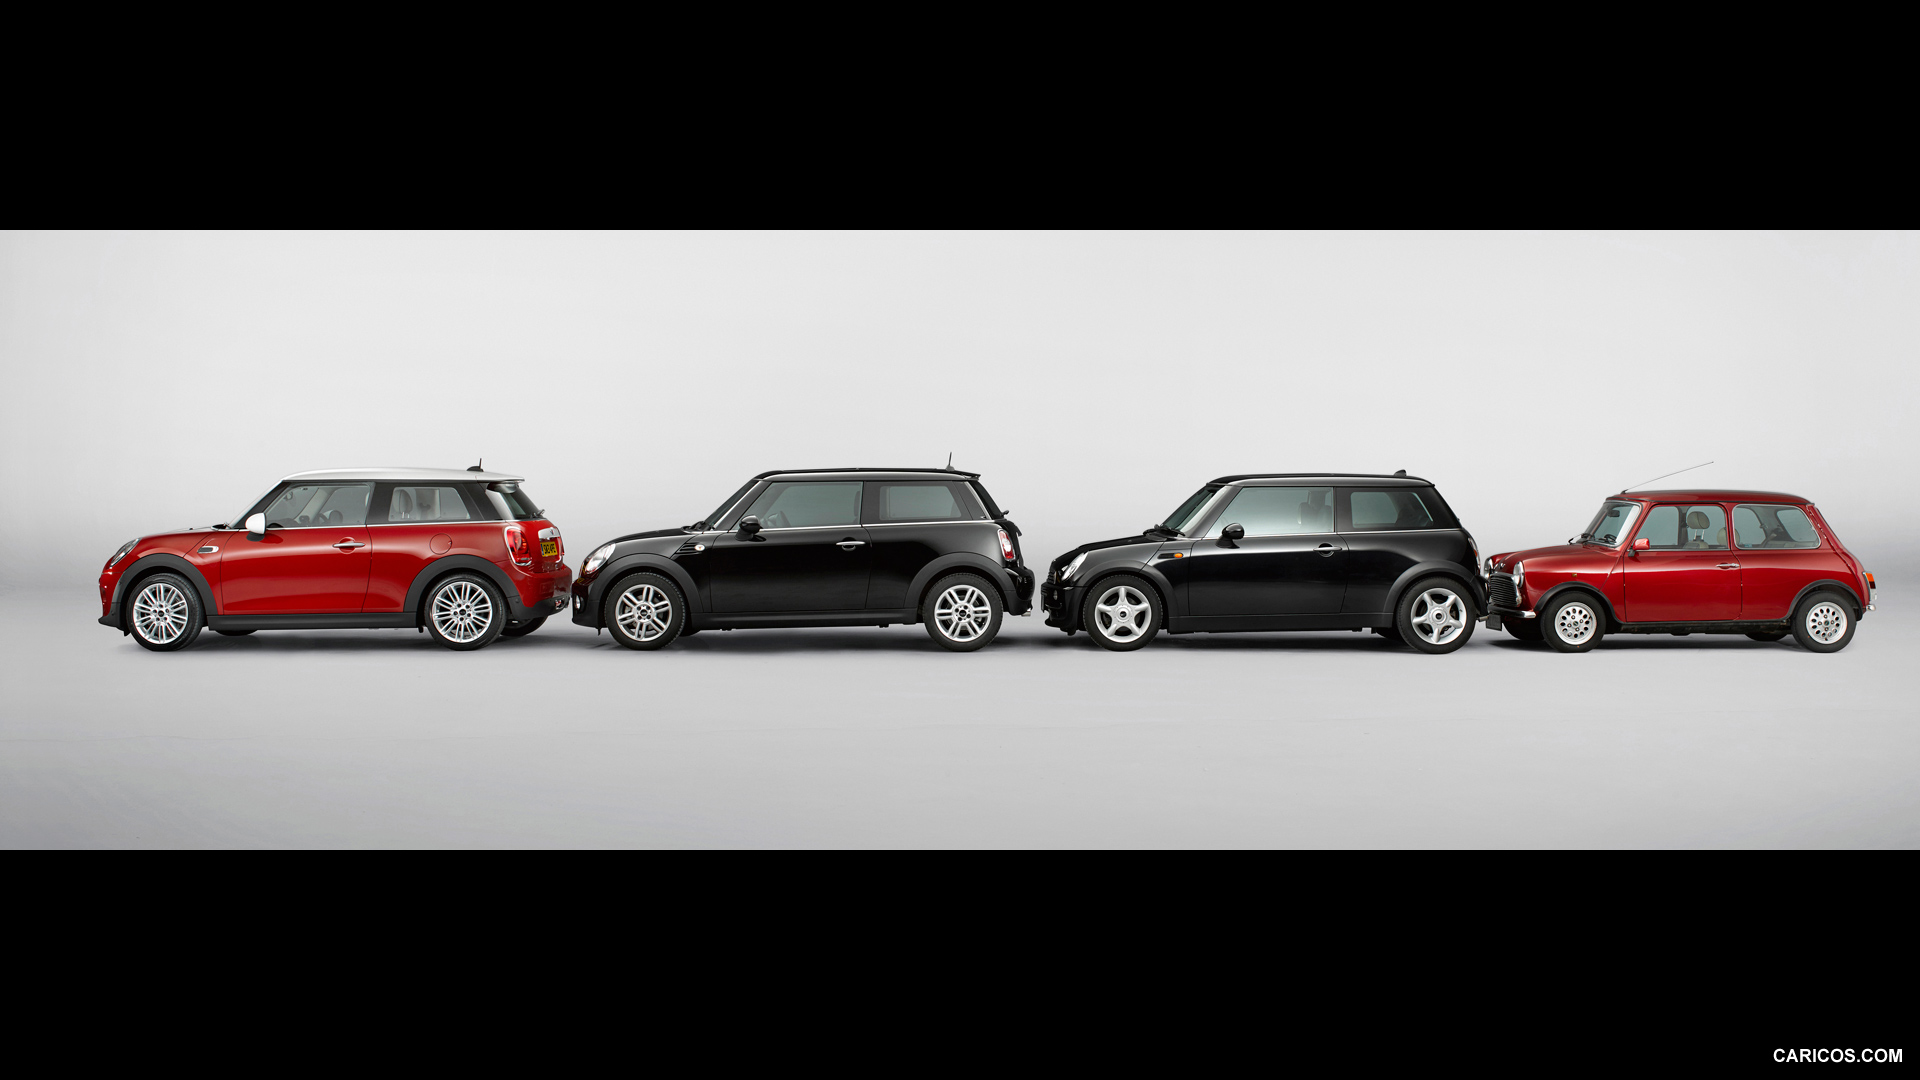 2015 MINI Cooper - Four Generations - Side, #124 of 280